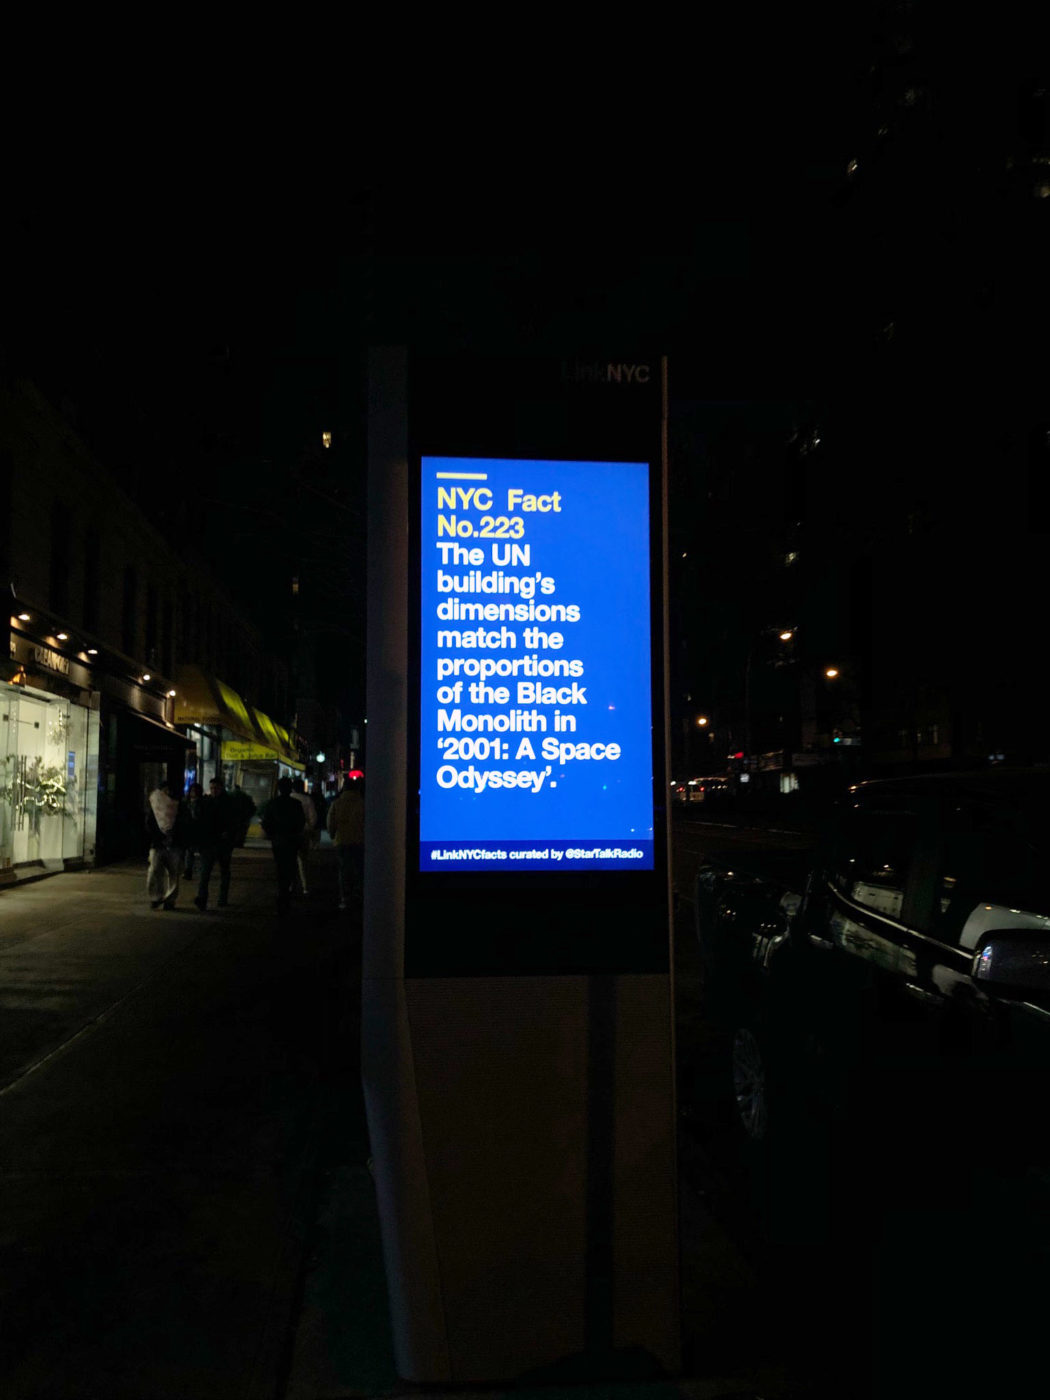 Another photo by Ben Ratner of a LinkNYC kiosk showing a science fact about the dimensions of the UN building matching the monolith in "2001: A Space Odyssey" curated by StarTalk and Neil deGrasse Tyson.